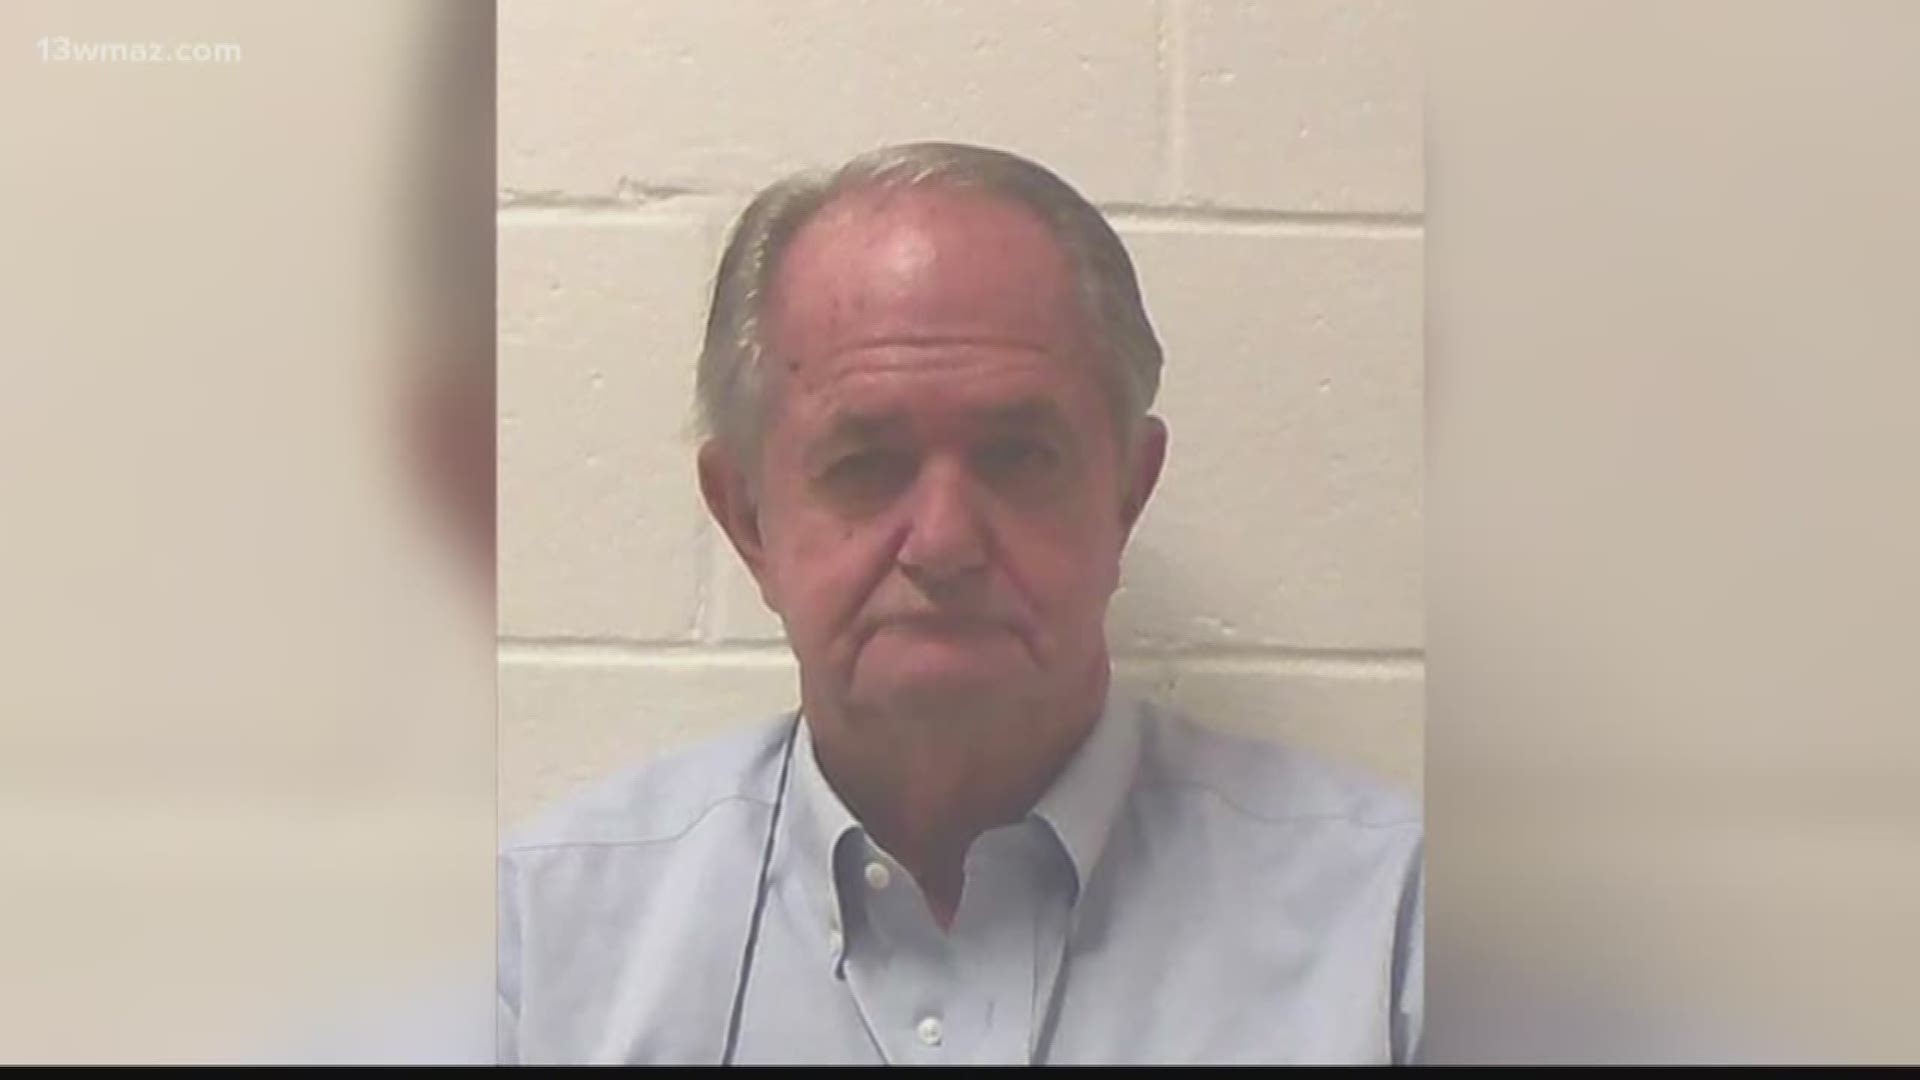 Jones County coroner Jerry Bridges Senior is off the job and accused of taking over $100,000 from families. He resigned Tuesday after being arrested on 24 fraud-related charges.